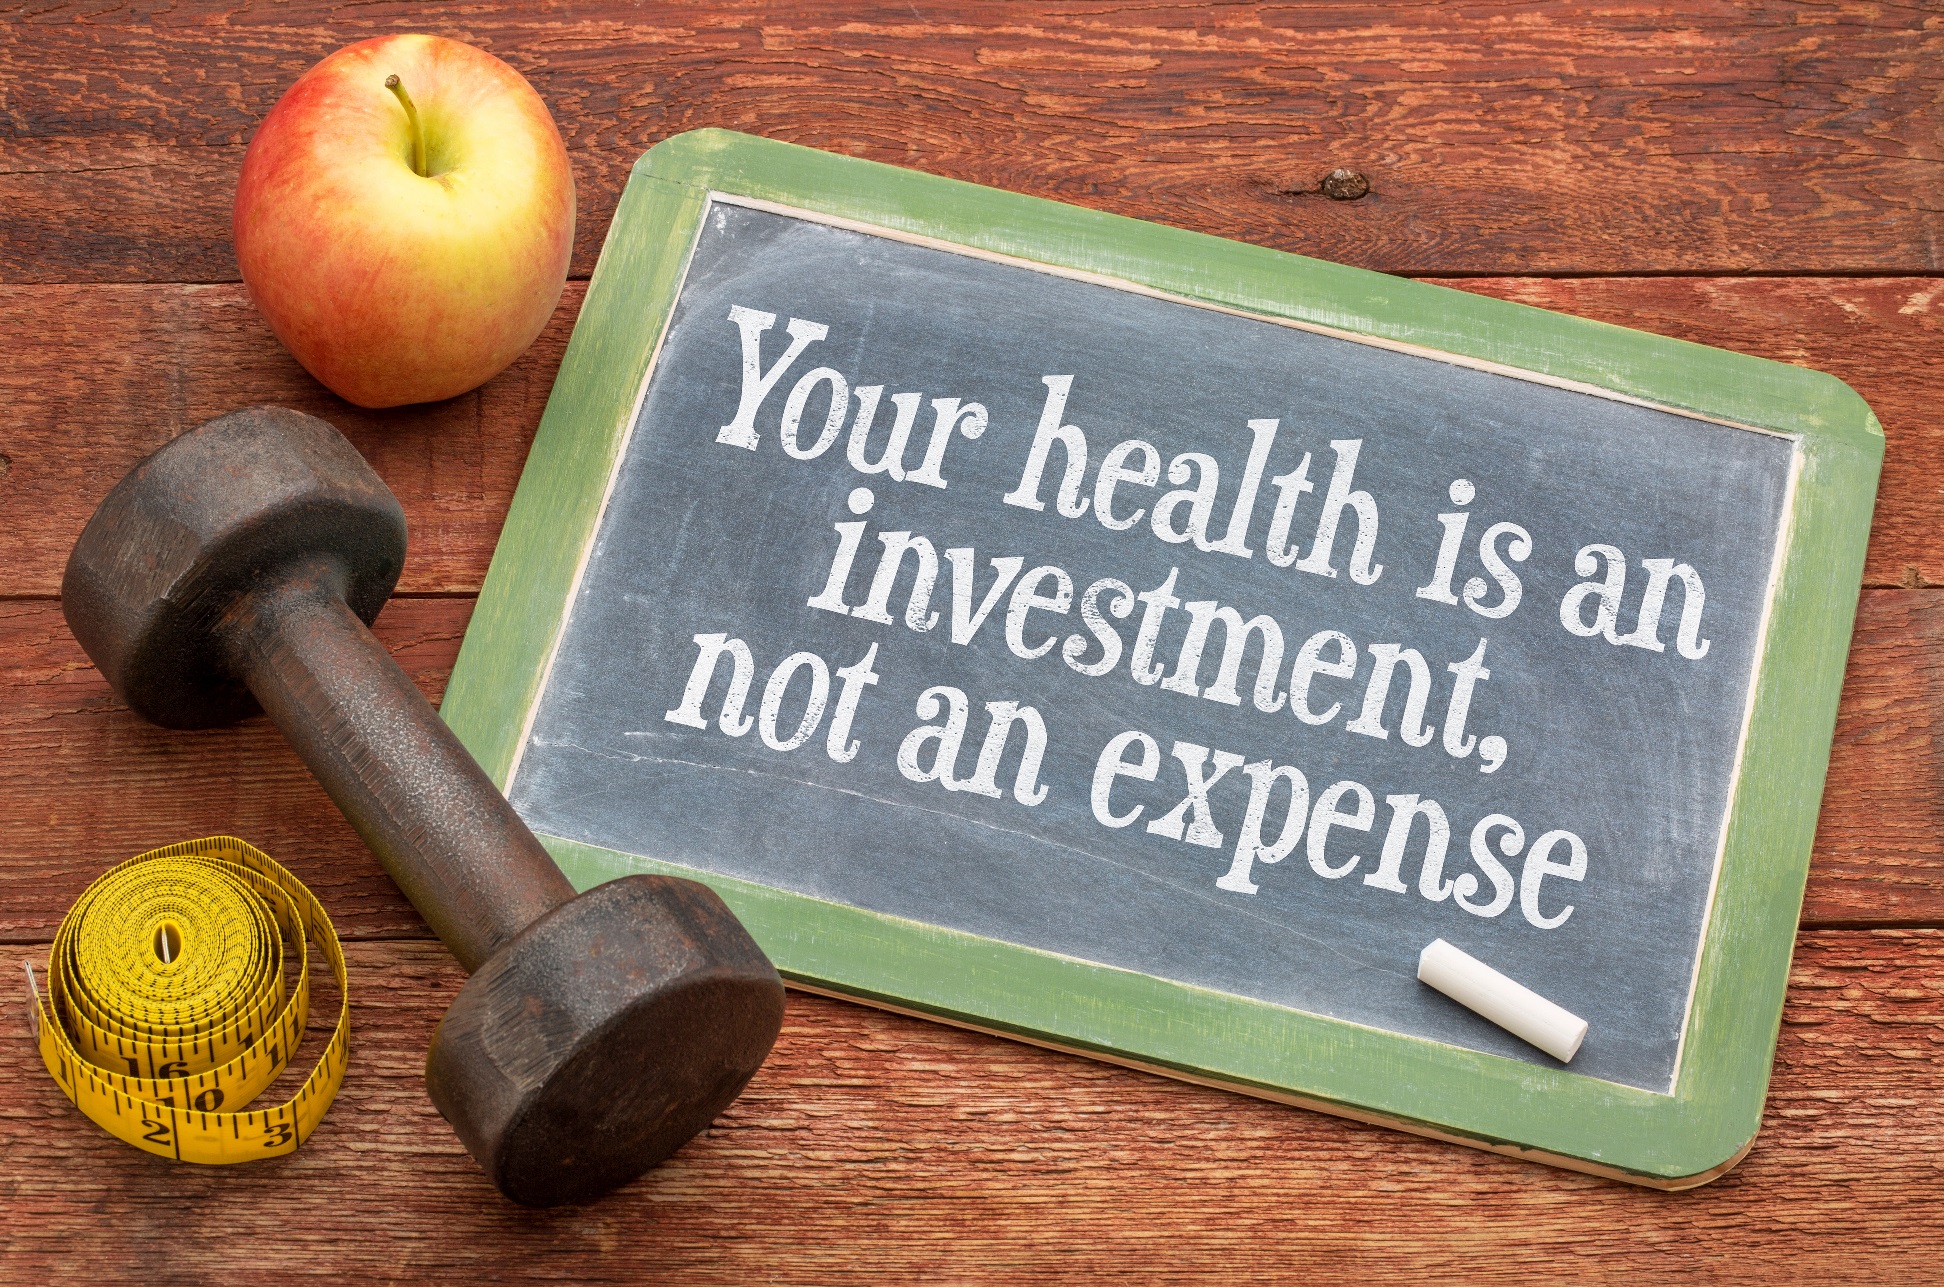 Health is an investment not an expense written on a blackboard on a wooden table with an apple, a tape measure and a small exercise hand-weight